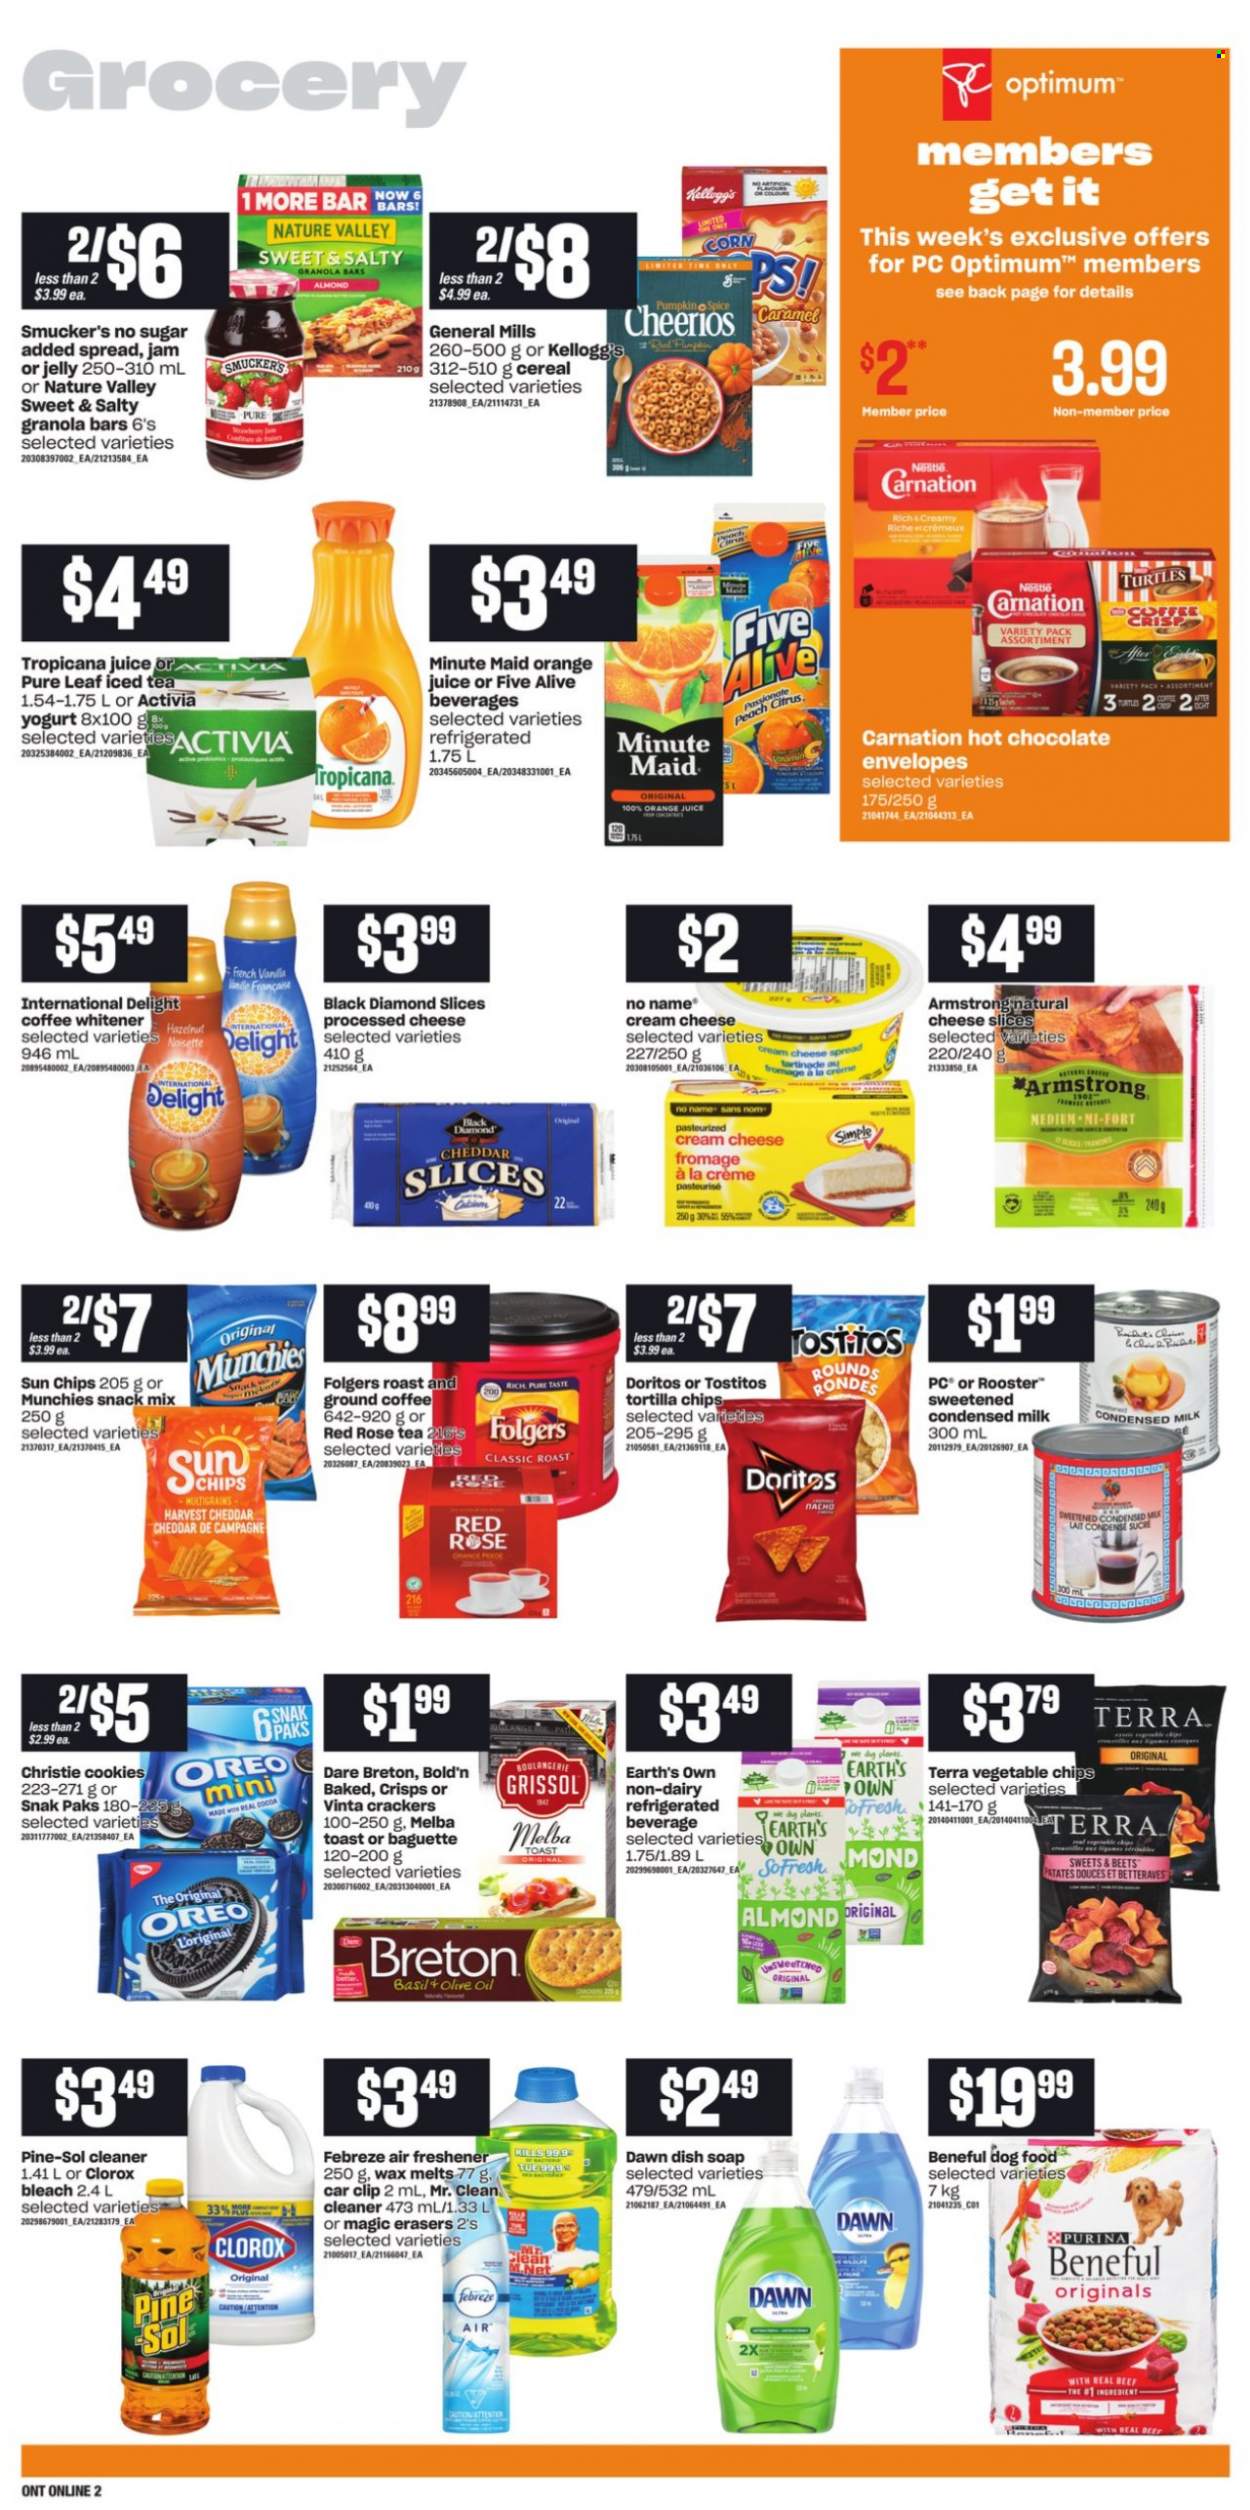 thumbnail - Loblaws Flyer - October 07, 2021 - October 13, 2021 - Sales products - corn, No Name, cream cheese, sliced cheese, cheese, yoghurt, Activia, milk, condensed milk, cookies, snack, jelly, crackers, Kellogg's, Doritos, tortilla chips, vegetable chips, Tostitos, cereals, Cheerios, granola bar, Nature Valley, esponja, olive oil, oil, fruit jam, orange juice, juice, ice tea, fruit punch, hot chocolate, Pure Leaf, coffee, Folgers, ground coffee, wine, rosé wine, Febreze, cleaner, bleach, Clorox, Pine-Sol, soap, turtles, animal food, dog food, Purina, Optimum, Oreo, baguette, chips. Page 8.